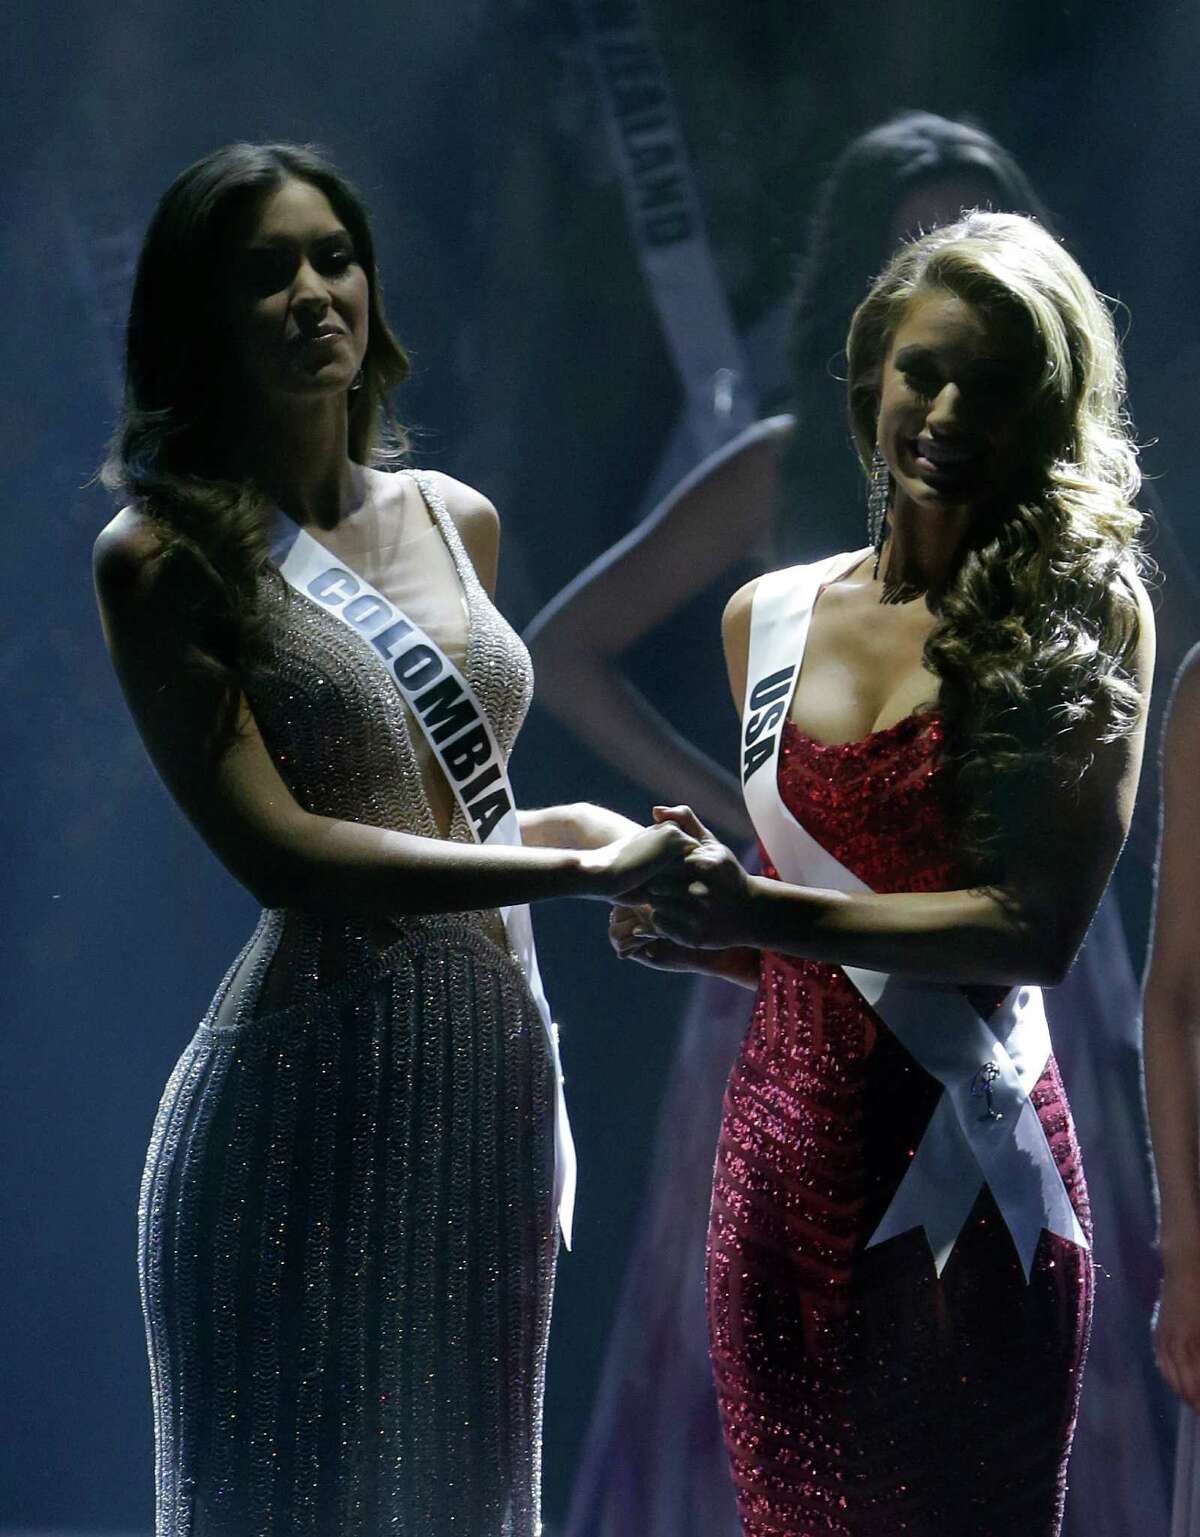 Paulina Vega of Colombia, left, and Nia Sanchez of the U.S., hold hands as the wait for the announcement of who will be selected as Miss Universe, Sunday, Jan. 25, 2015, during the Miss Universe pageant in Miami.